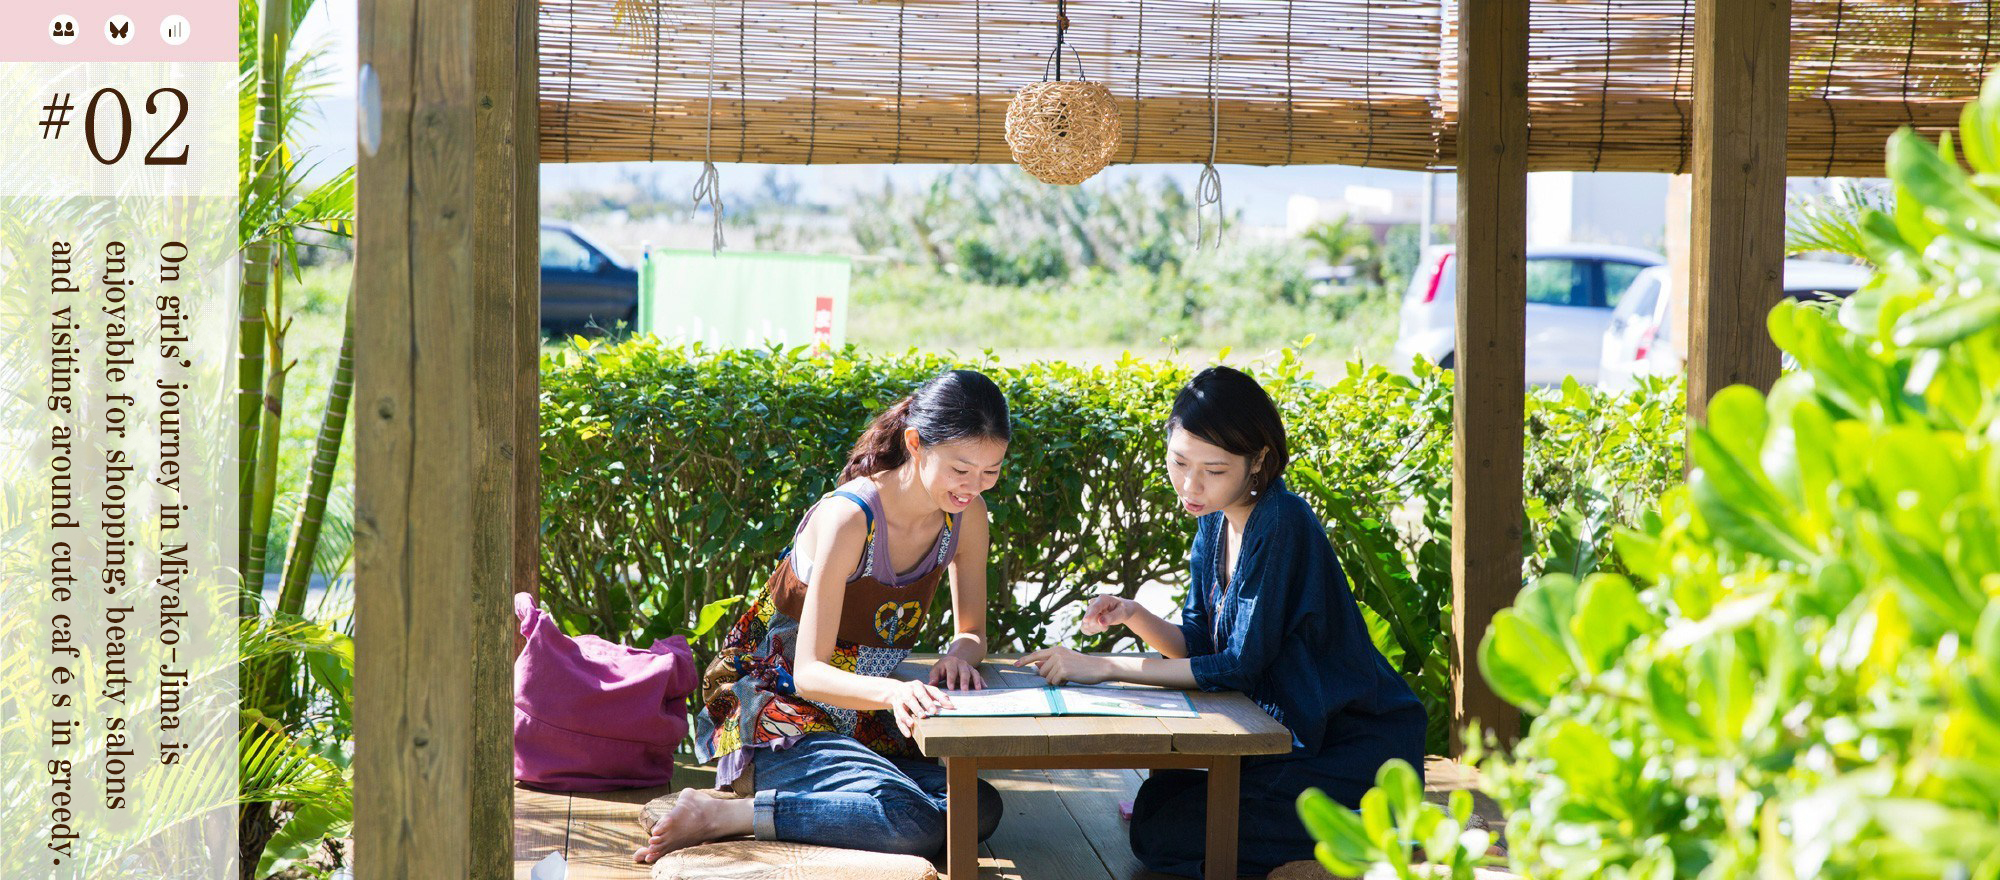 On girls journey in Miyako-Jima is enjoyable for shopping, beauty salons and visiting around cute cafés in greedy.